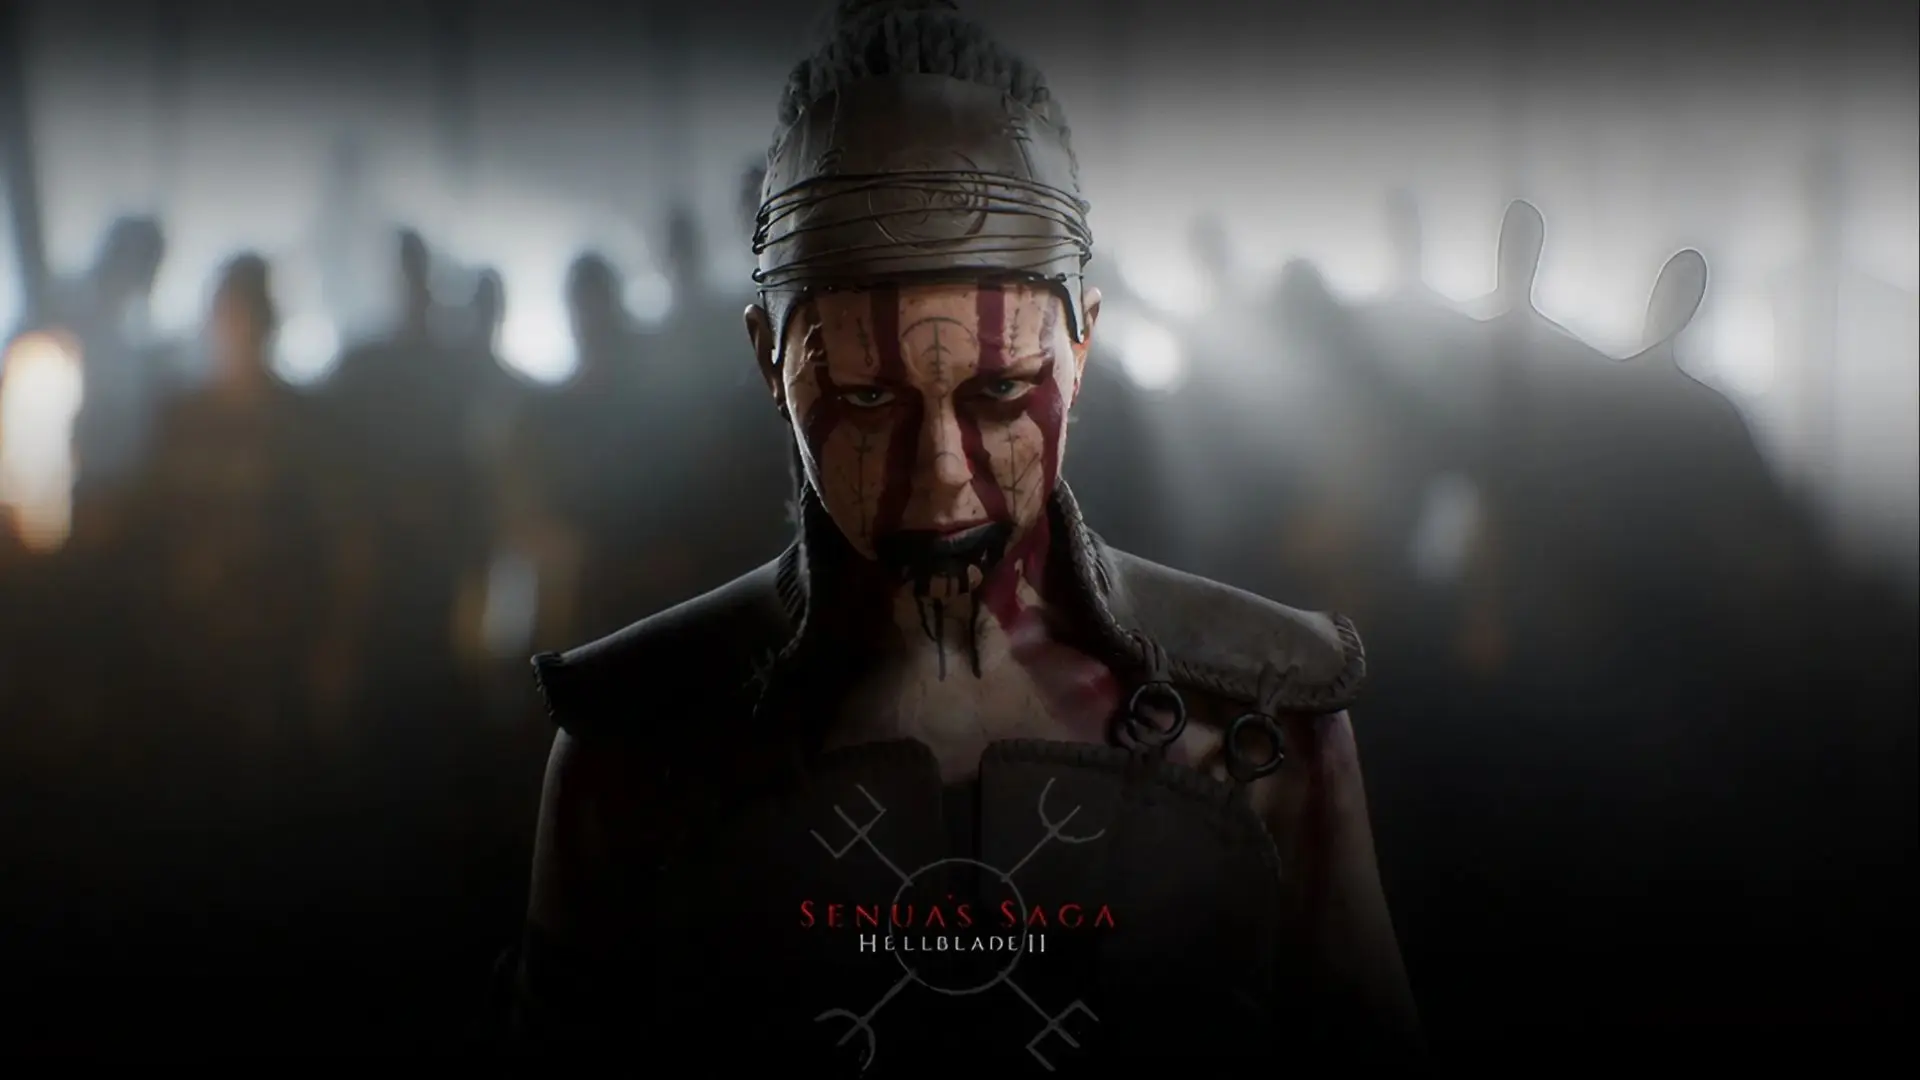 Hellblade 2 trailer shows off photorealistic faces and thrilling giant fight